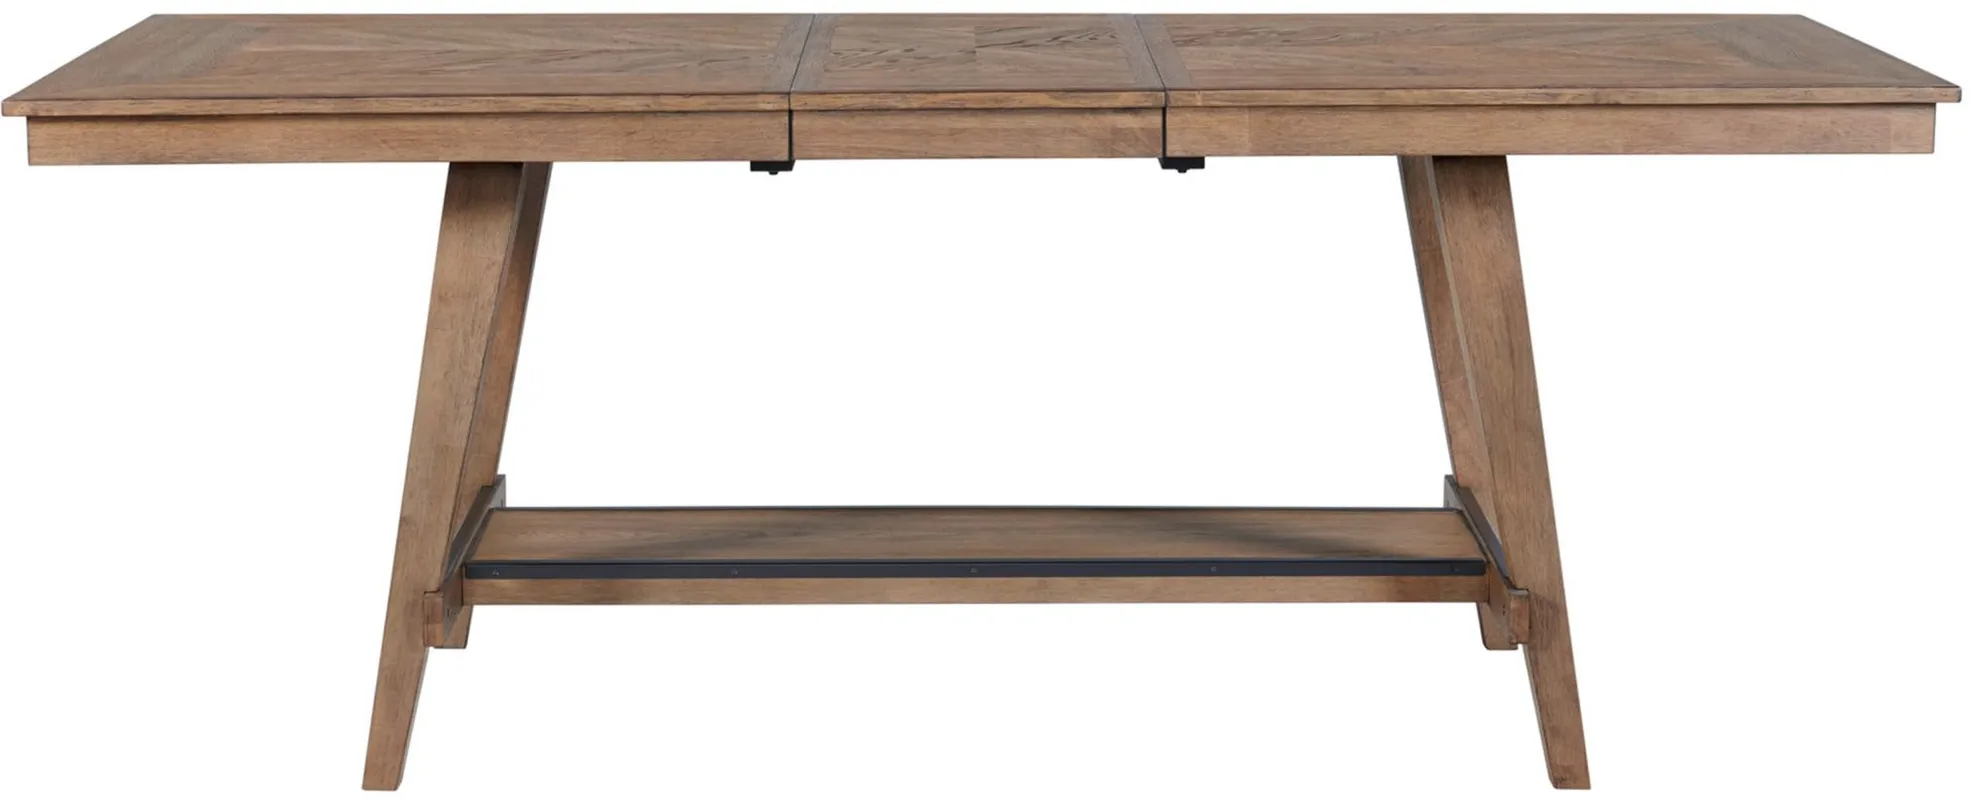 Oslo Gathering Table in Weathered Chestnut by Intercon